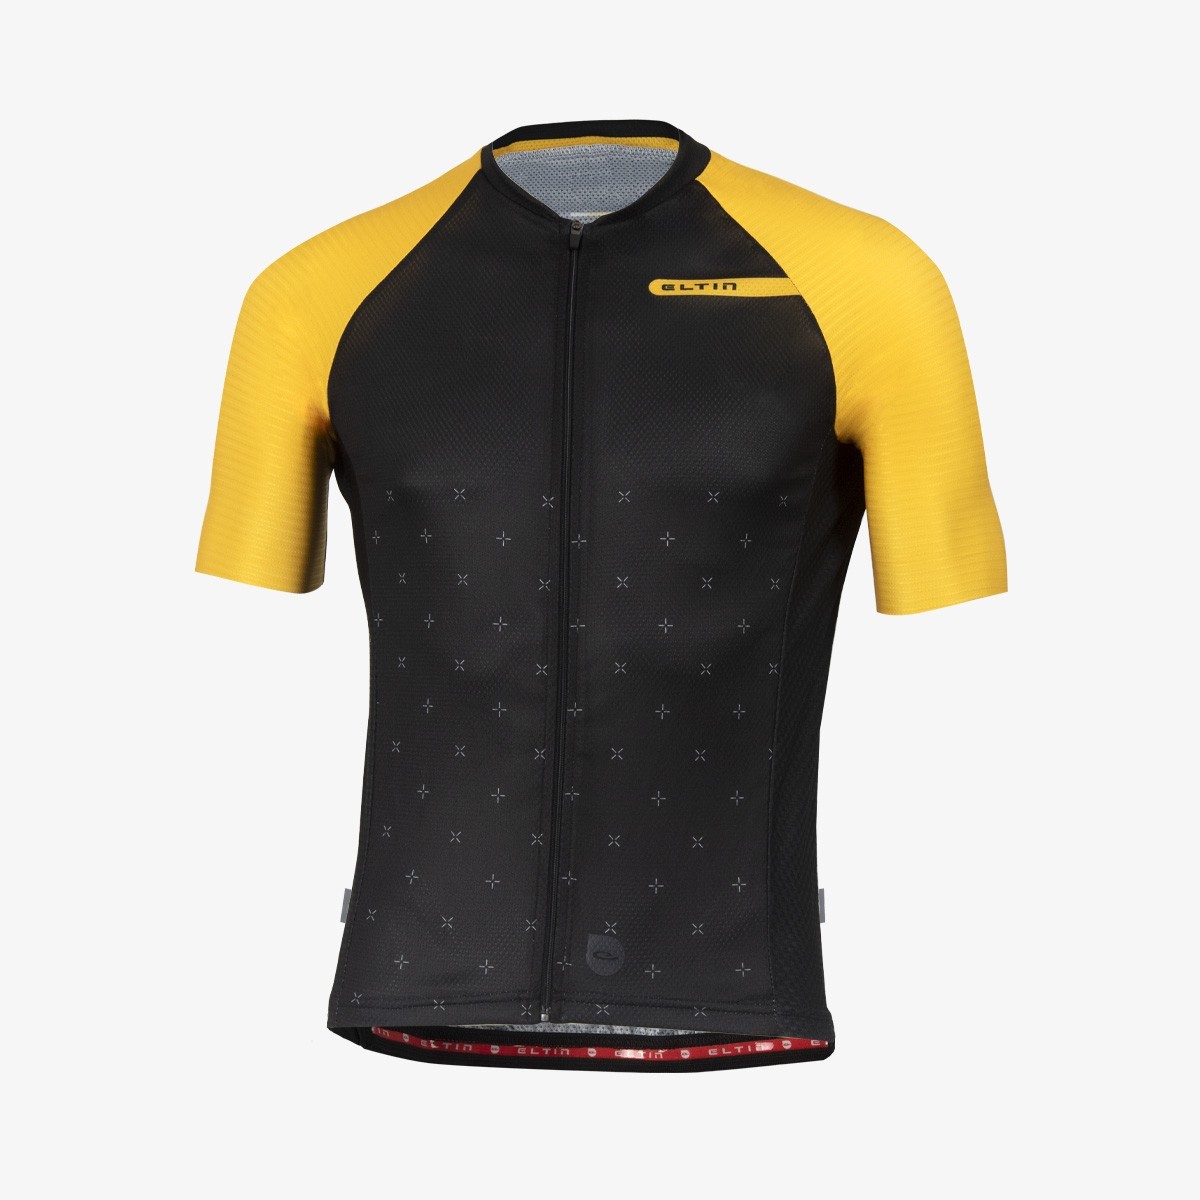 Maillot ciclismo Resistance negro